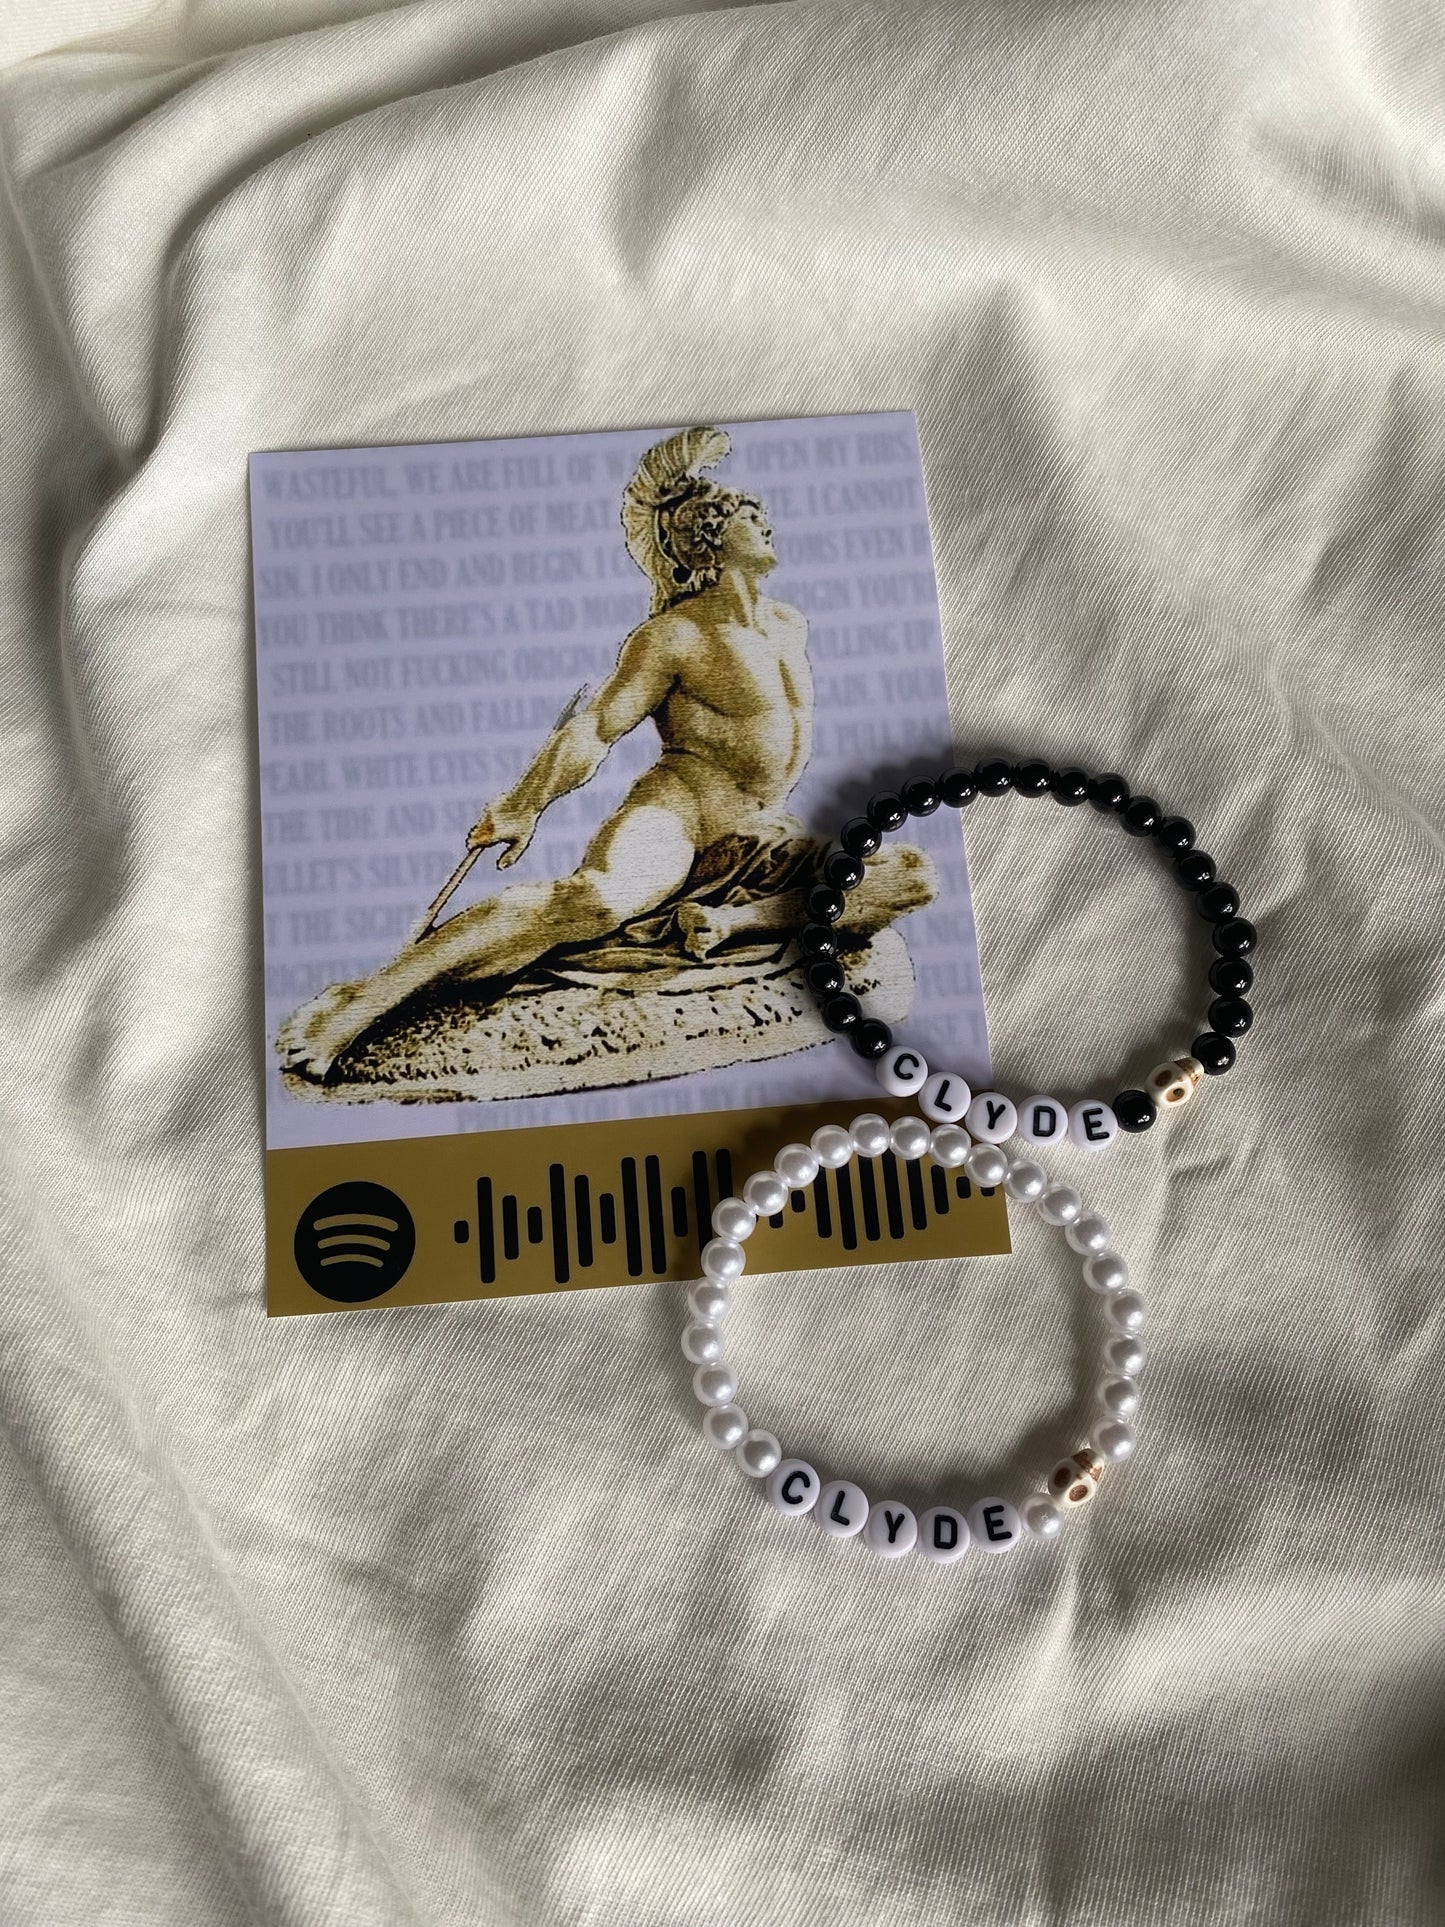 Clyde by Suicideboys matching bracelets